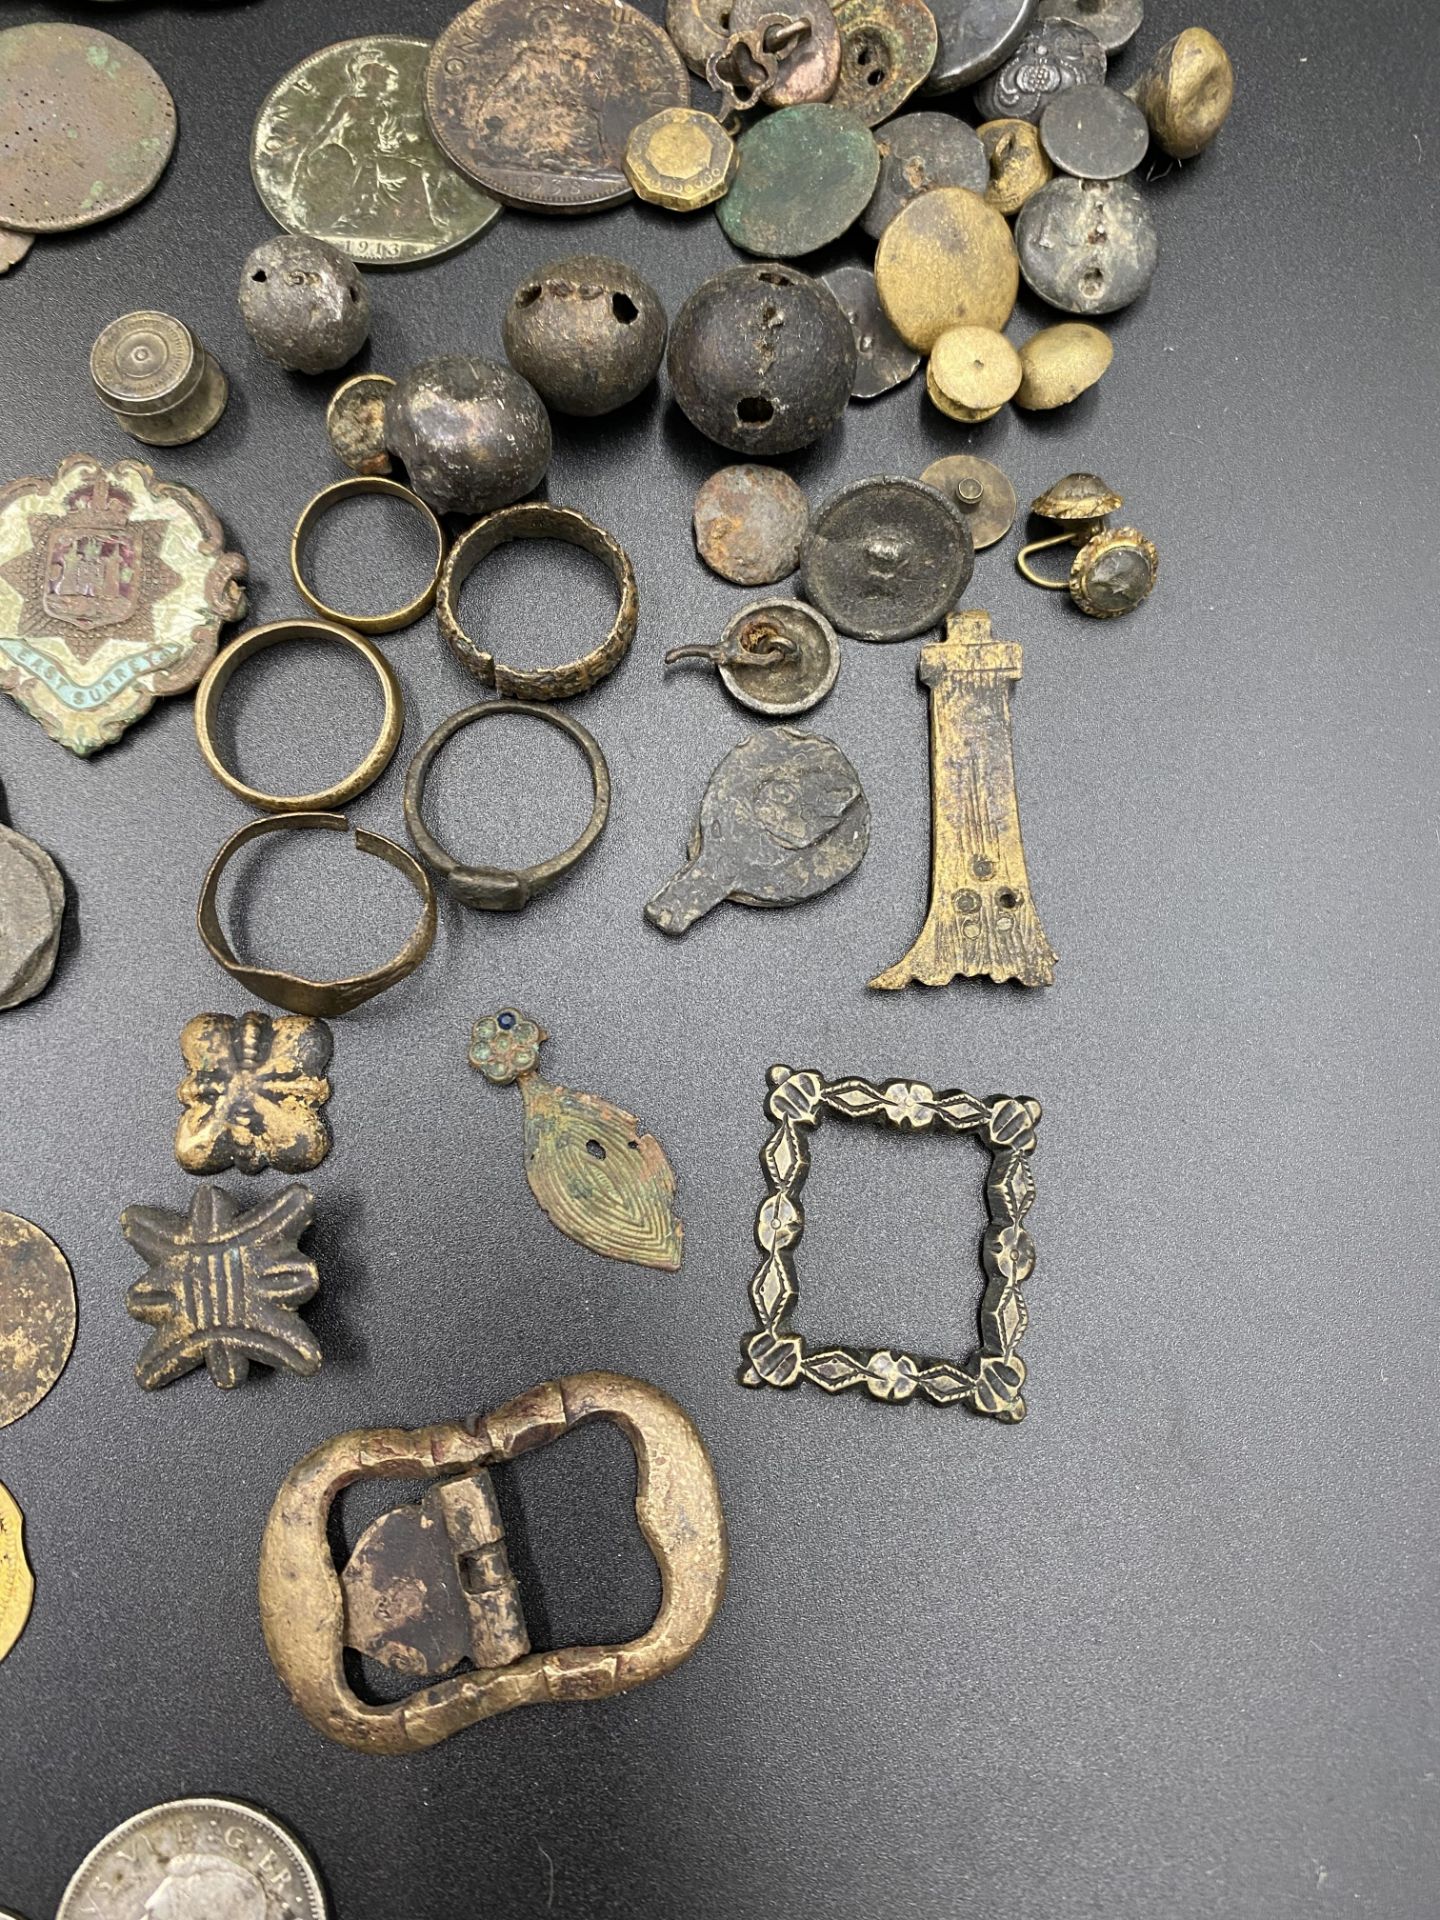 Collection of finds from the Thames Estuary, including coins, tags and buttons. - Image 4 of 8